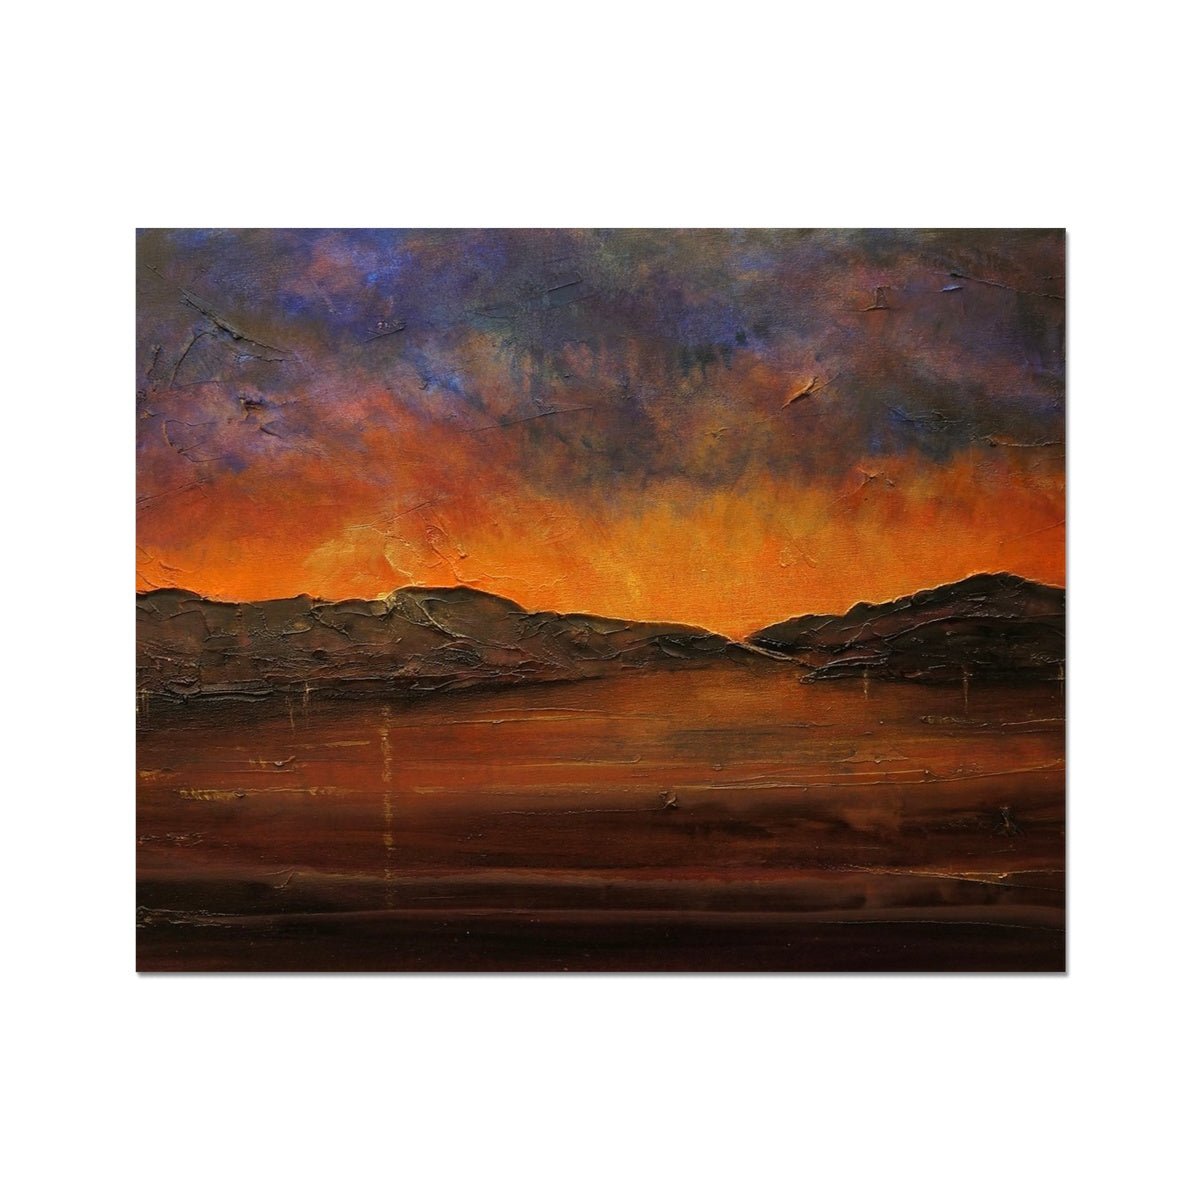 A Brooding River Clyde Dusk Painting | Artist Proof Collector Prints From Scotland-Artist Proof Collector Prints-River Clyde Art Gallery-20"x16"-Paintings, Prints, Homeware, Art Gifts From Scotland By Scottish Artist Kevin Hunter